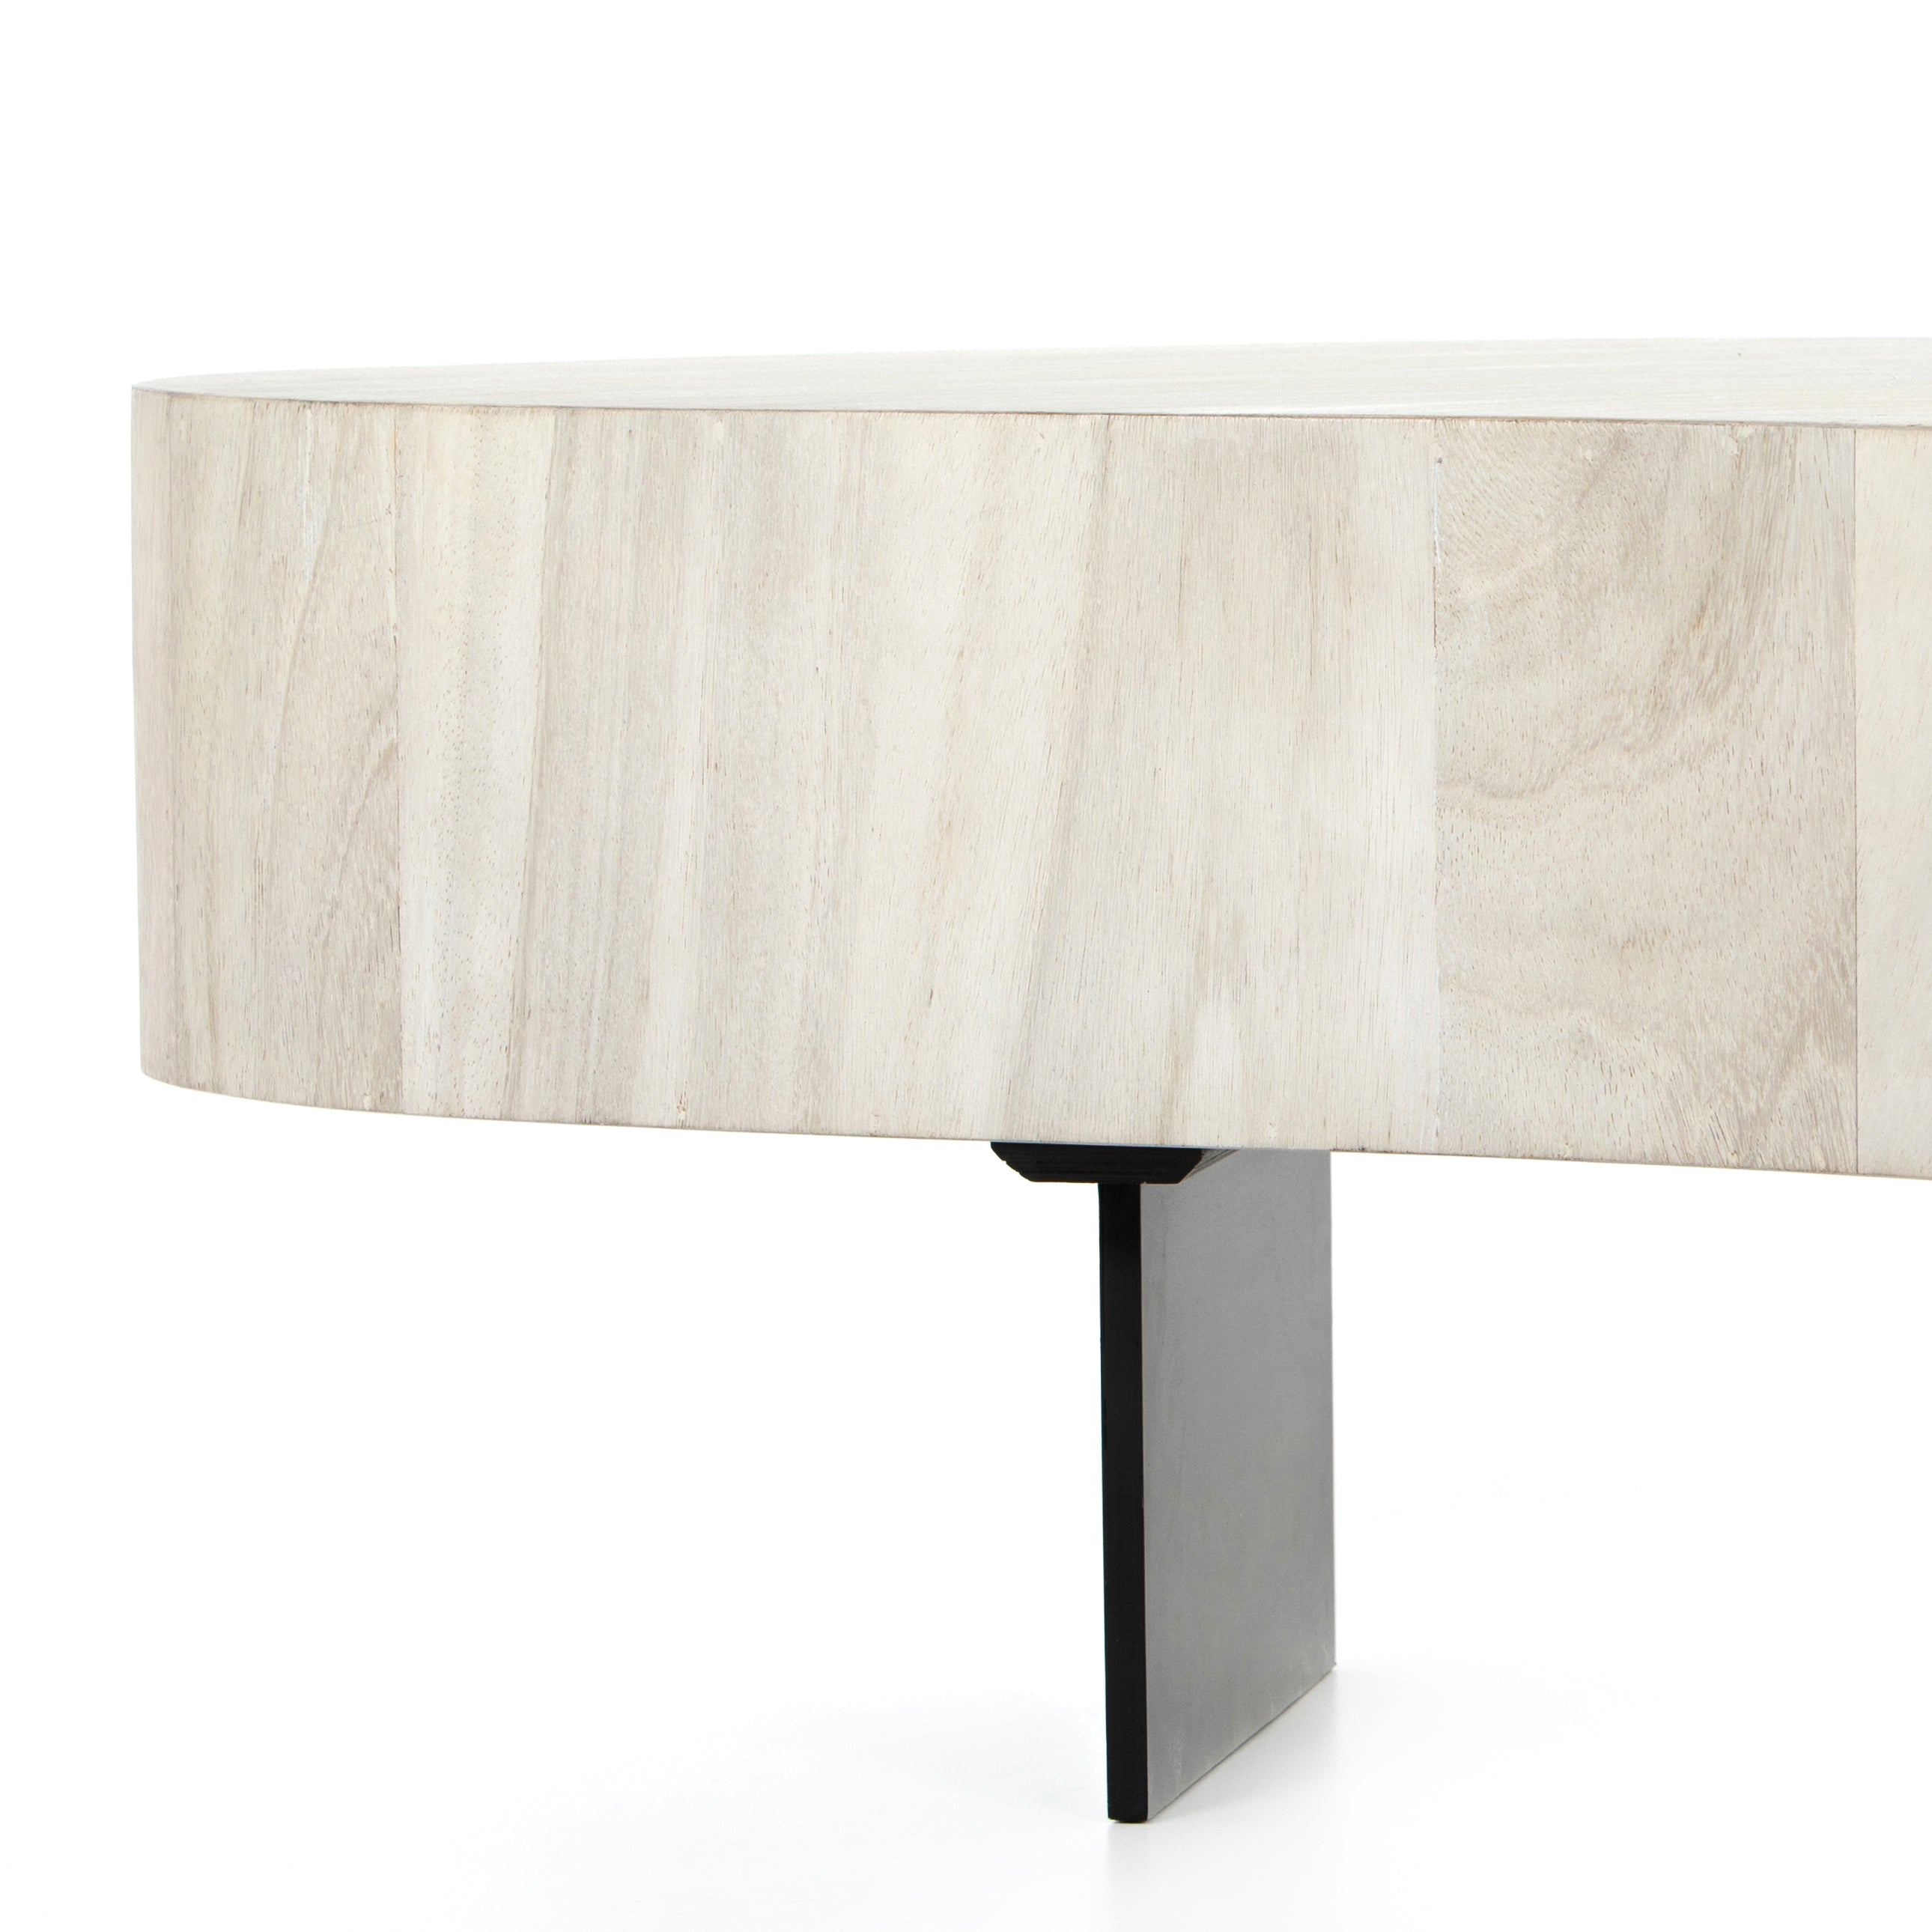 Natural beauty - total novelty. A thick slab of bleached, oyster-cut Guanacaste forms a tall, kidney-shaped coffee table. Visible rings speak to woods' natural graining, while a dark gunmetal-finished base provides clean contrast to the whole look. Amethyst Home provides interior design, new construction, custom furniture, and area rugs in the Laguna Beach metro area.